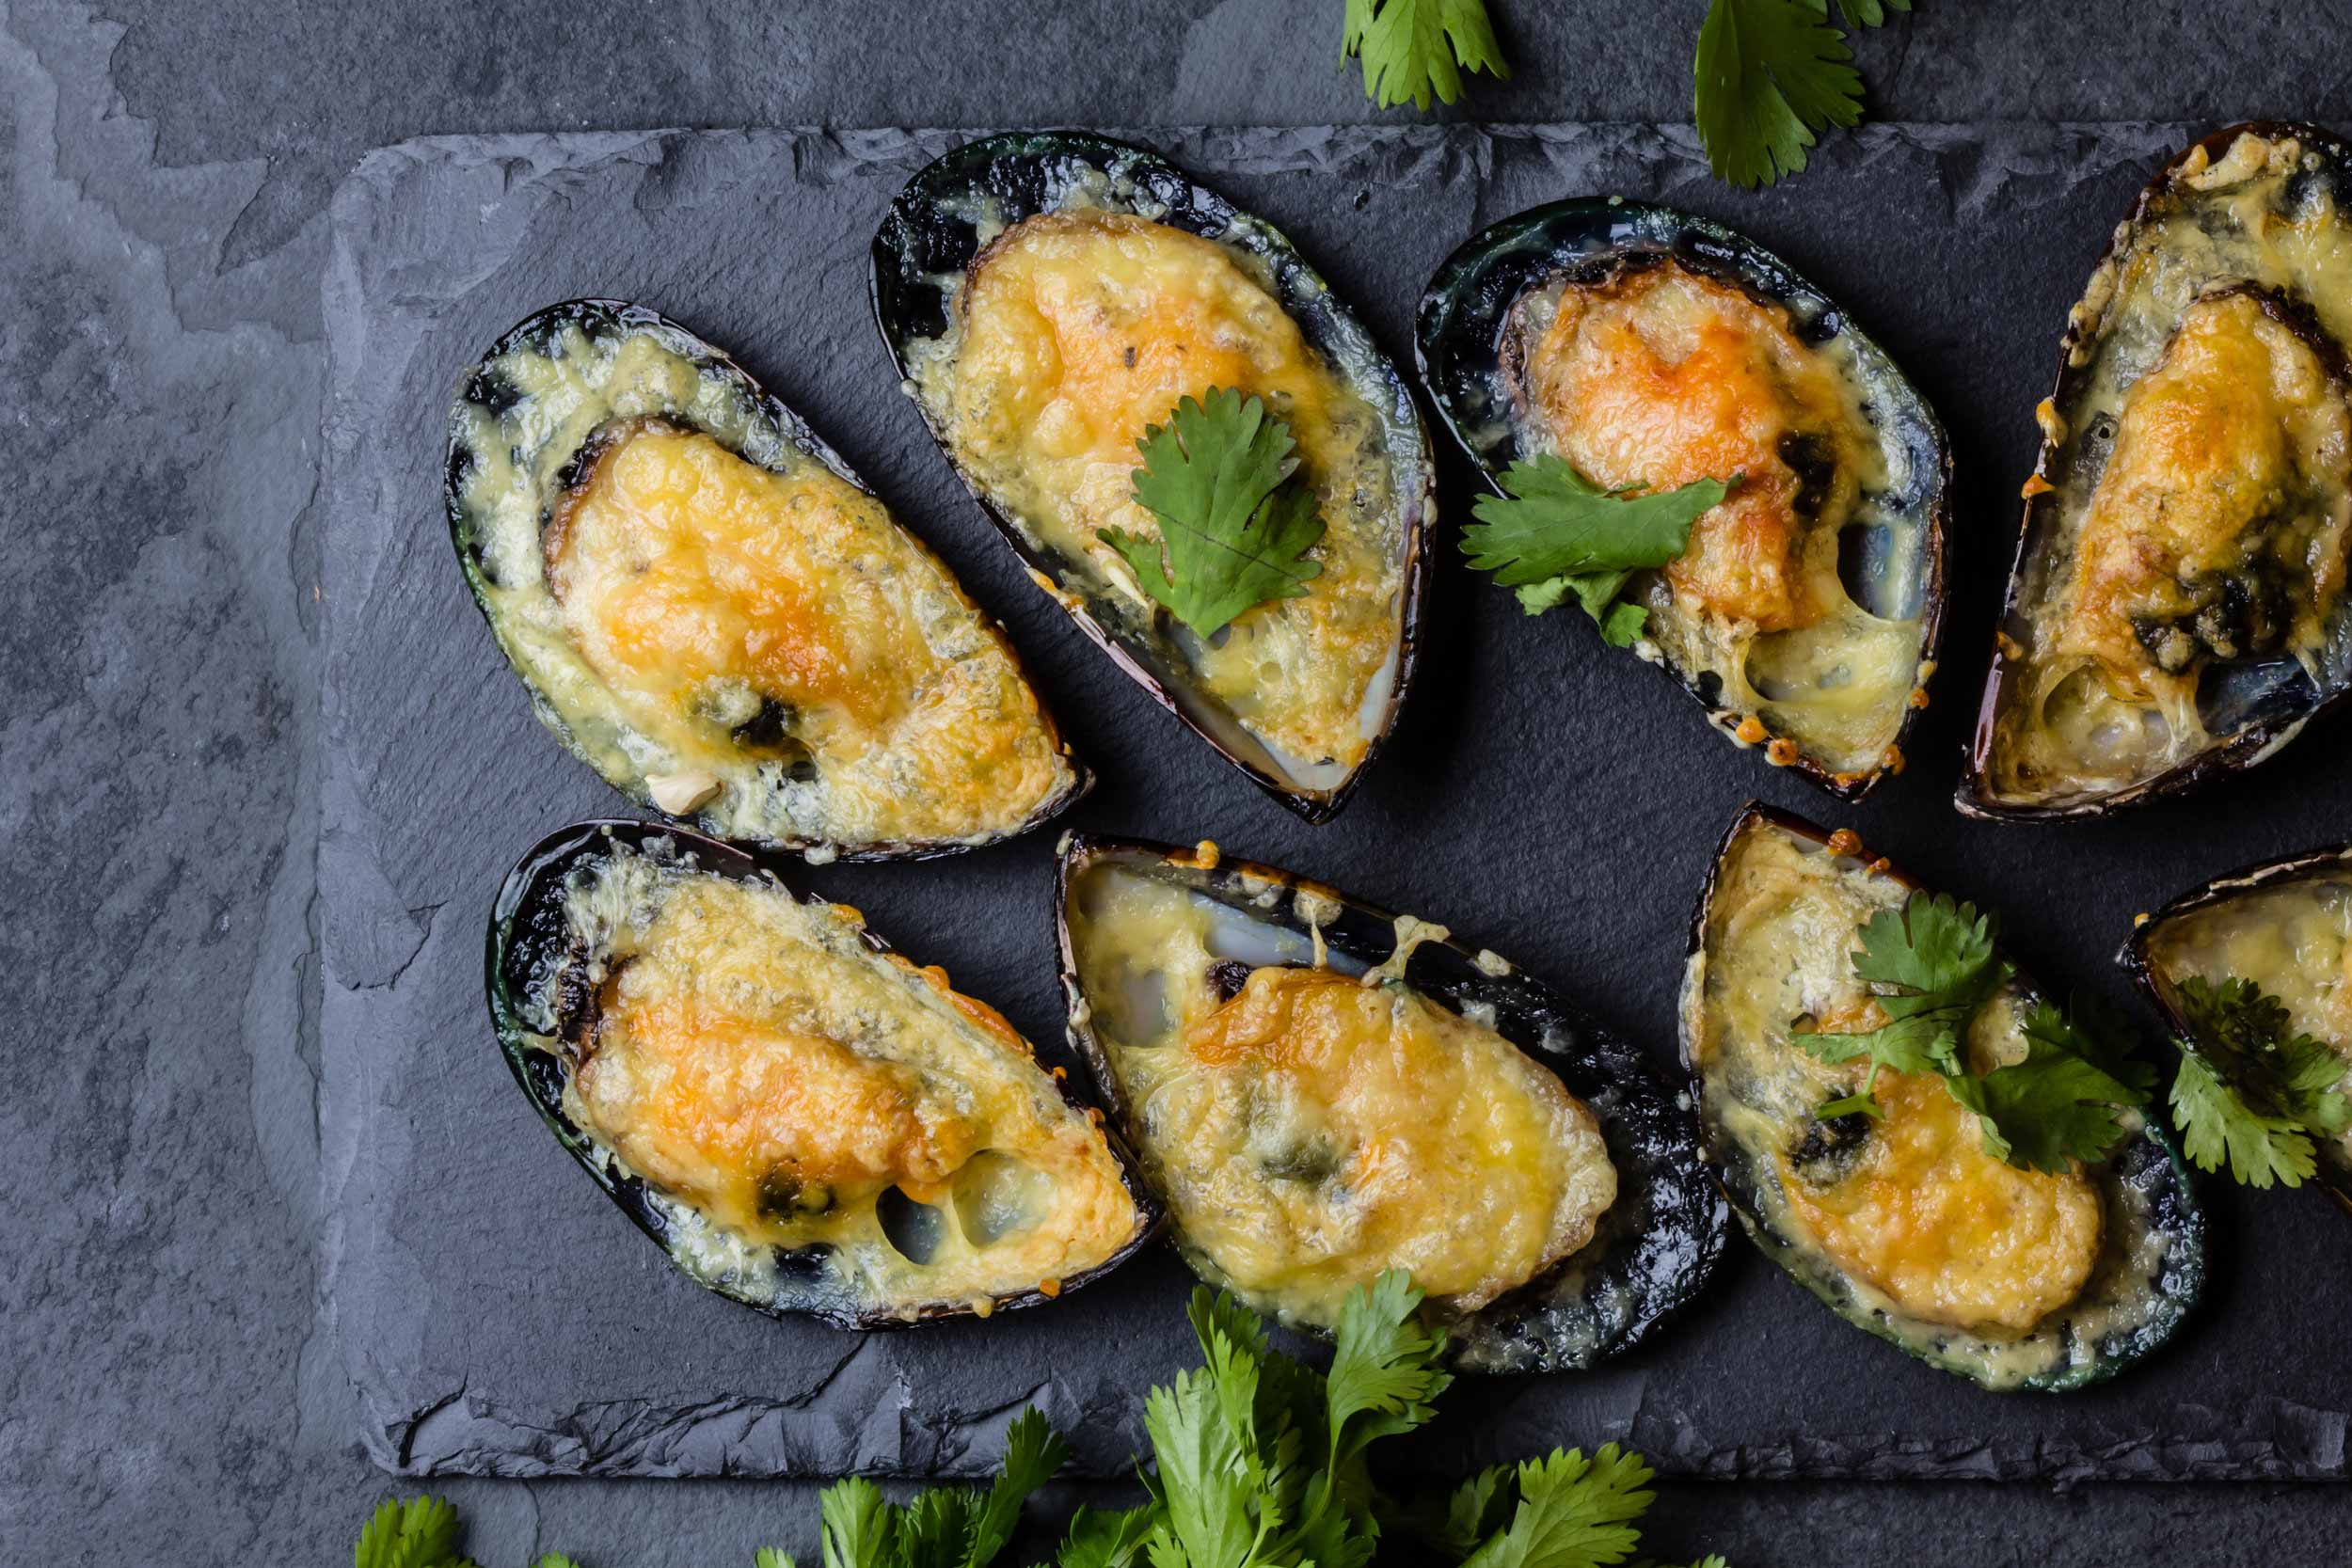 Team-recipes-baked-mussels